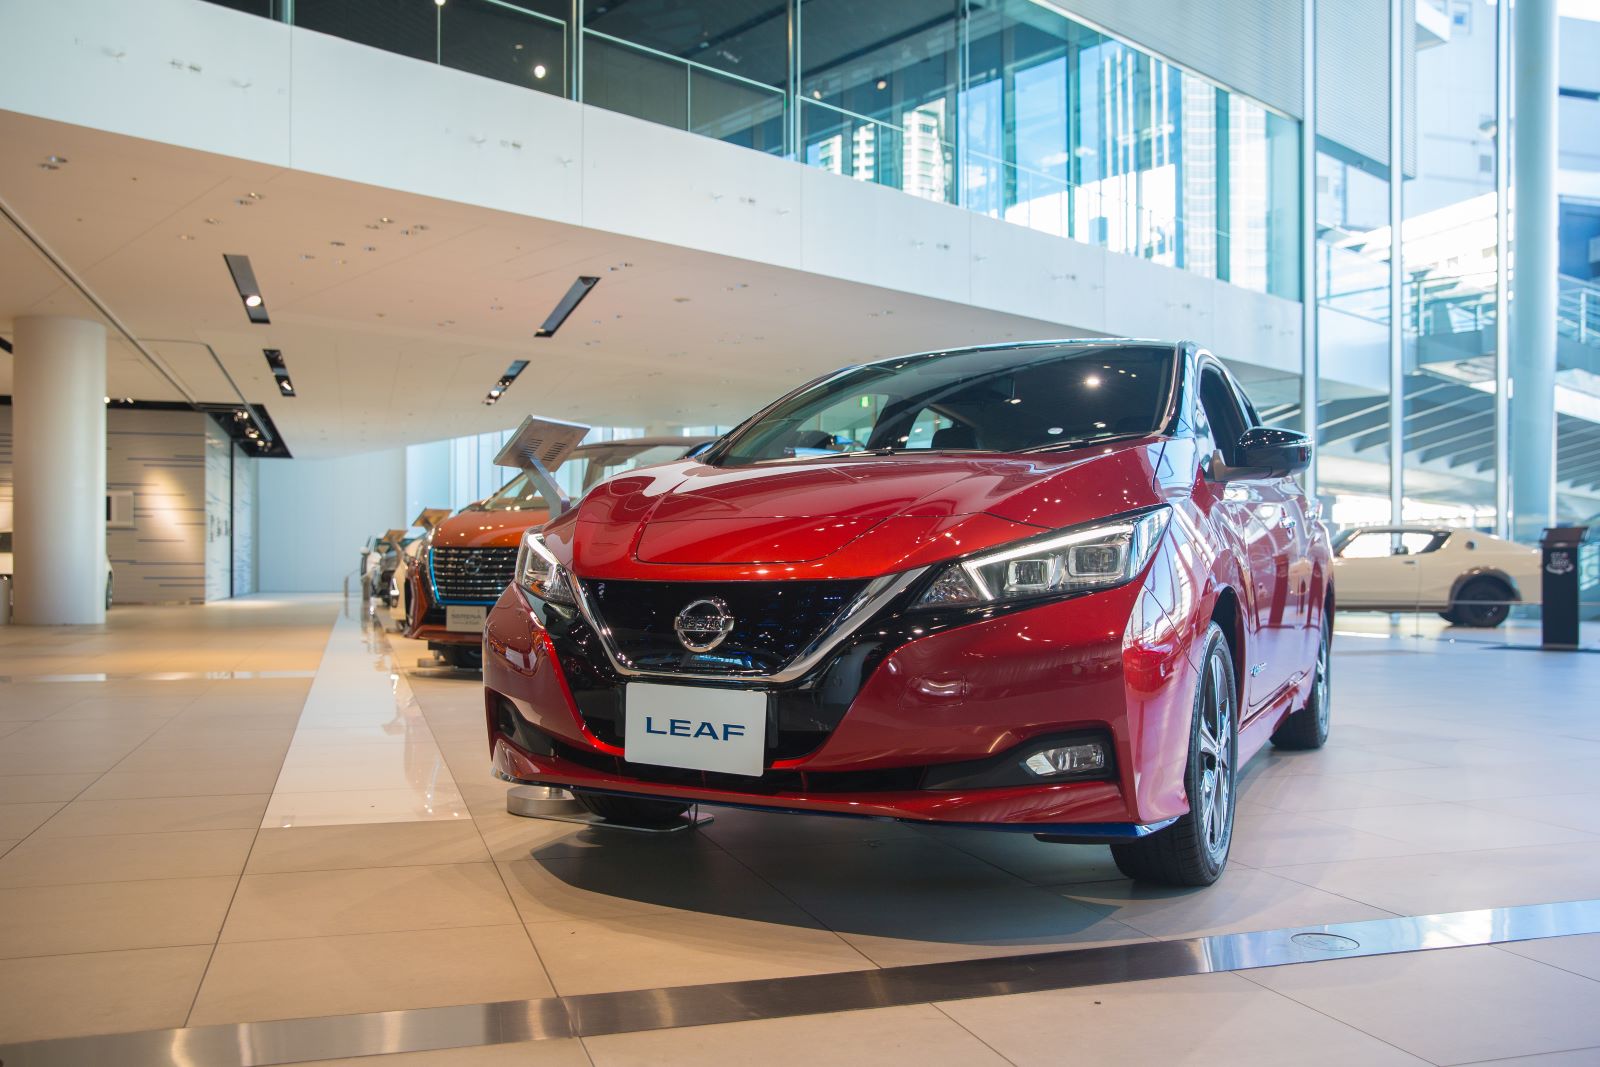 Red 2019 Nissan Leaf, one of the most reliable used cars, displayed on a dealership's showroom floor